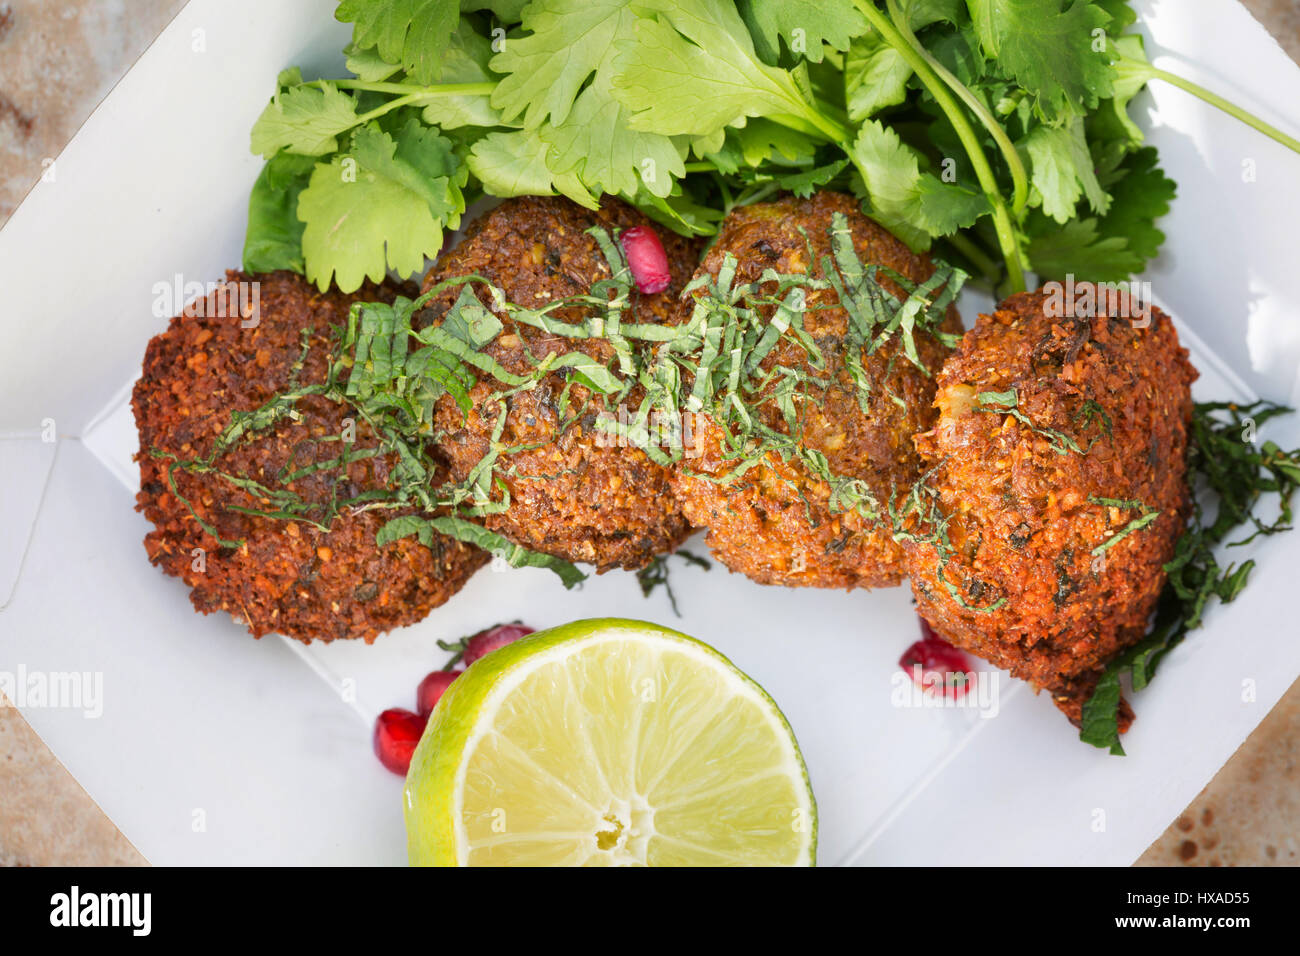 Vegetarian food - Falafel, lime and coriander Stock Photo